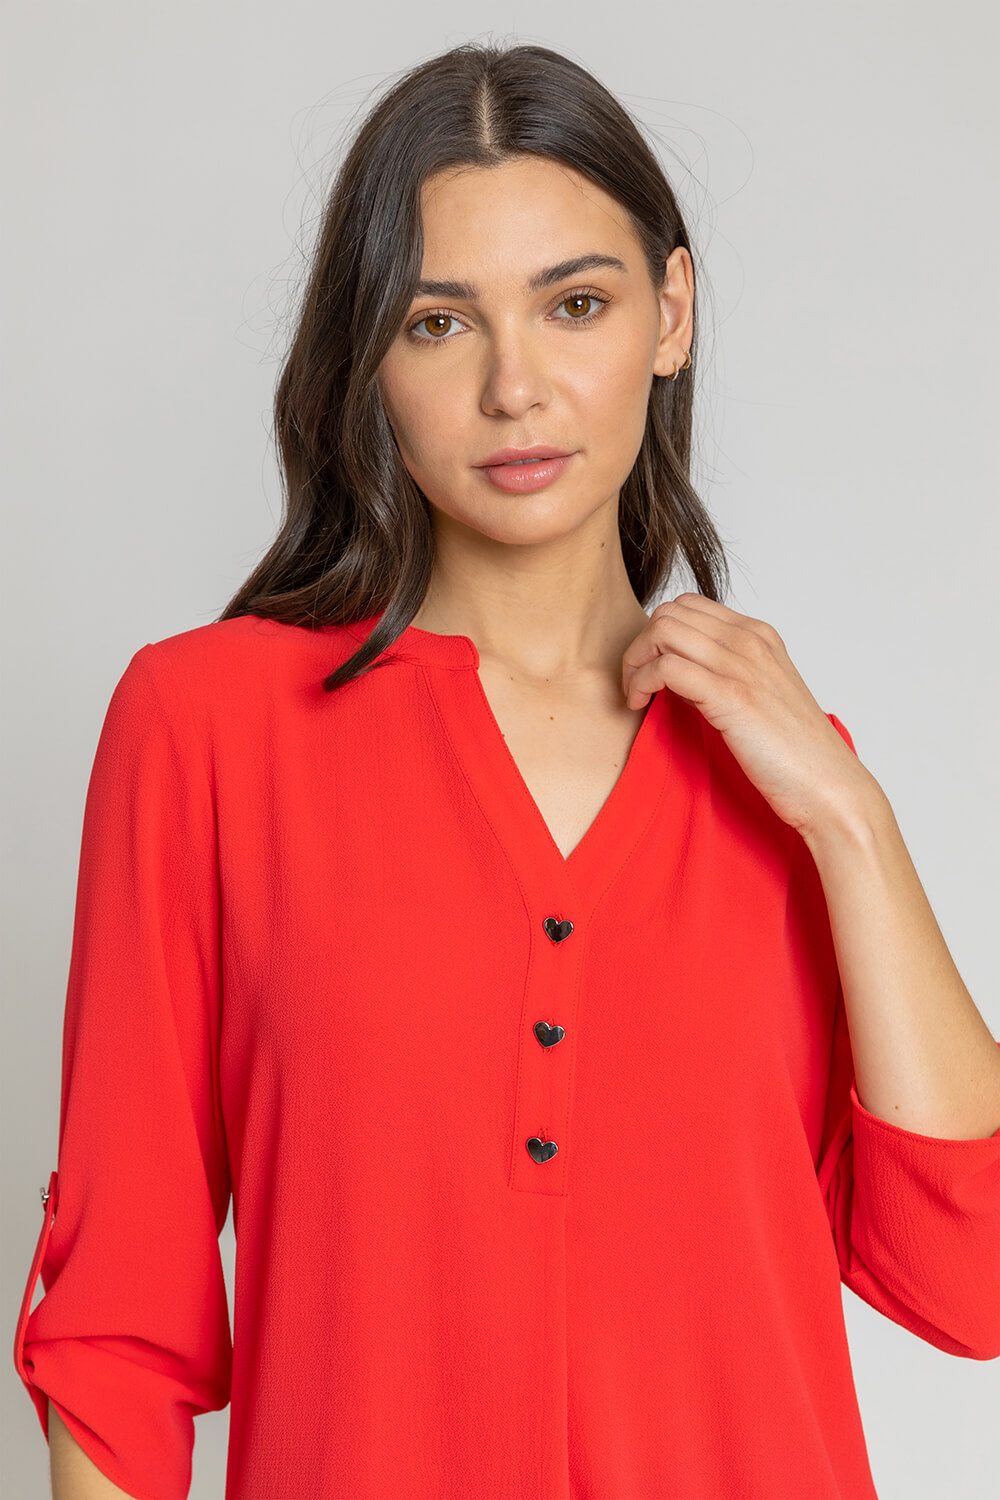 CORAL Longline Heart Button Detail Blouse, Image 4 of 5